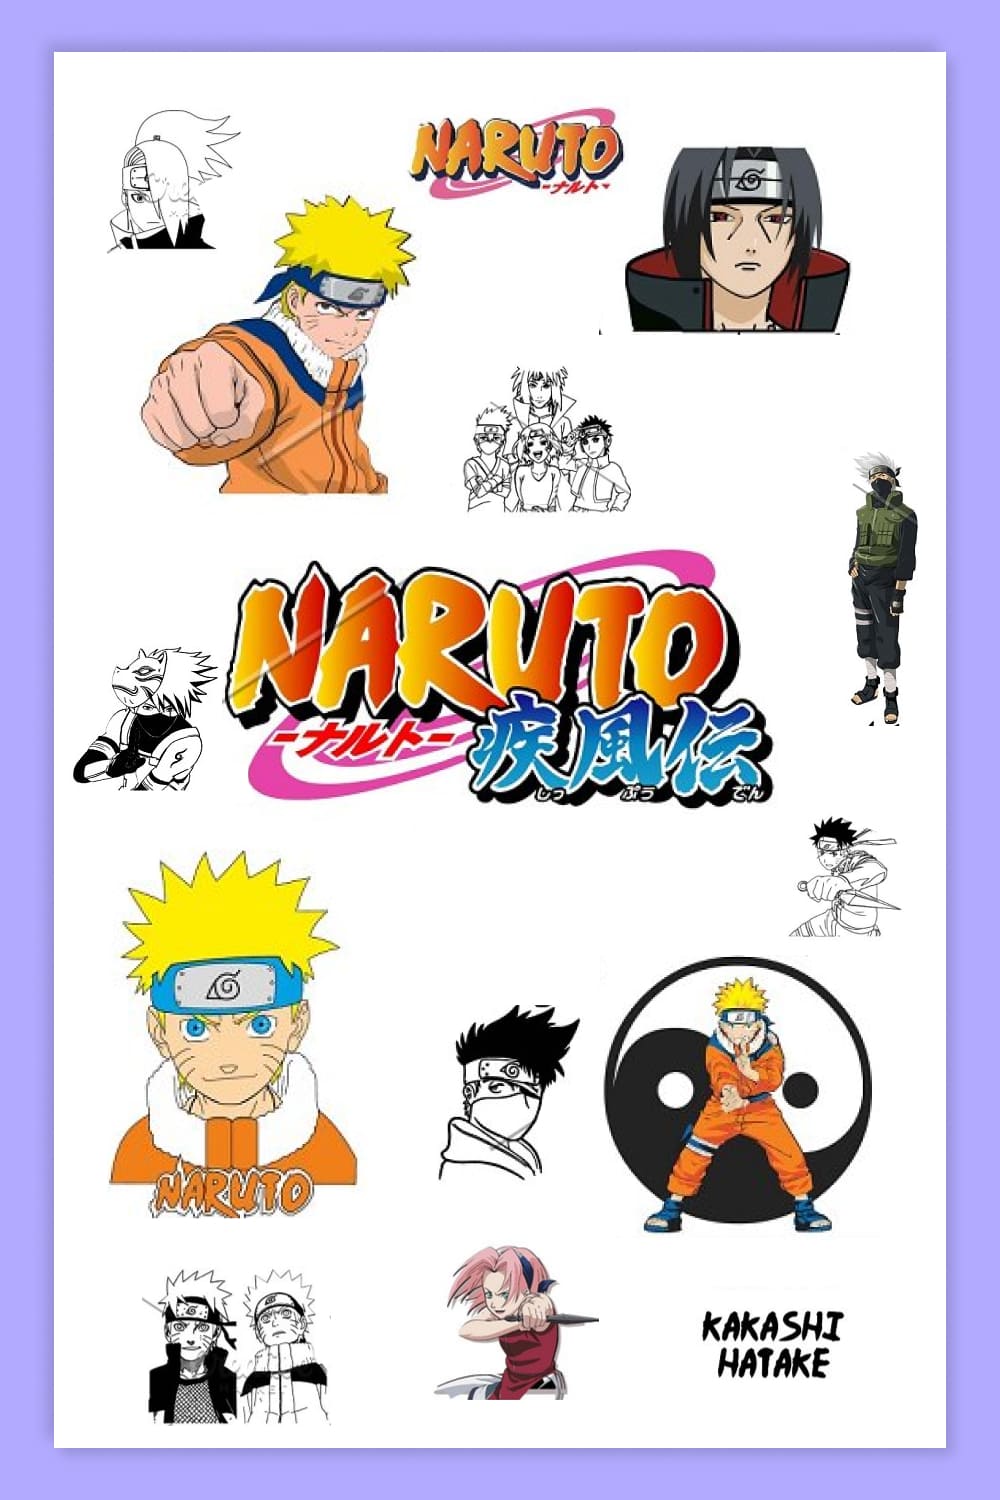 A collage of images of Naruto heroes.